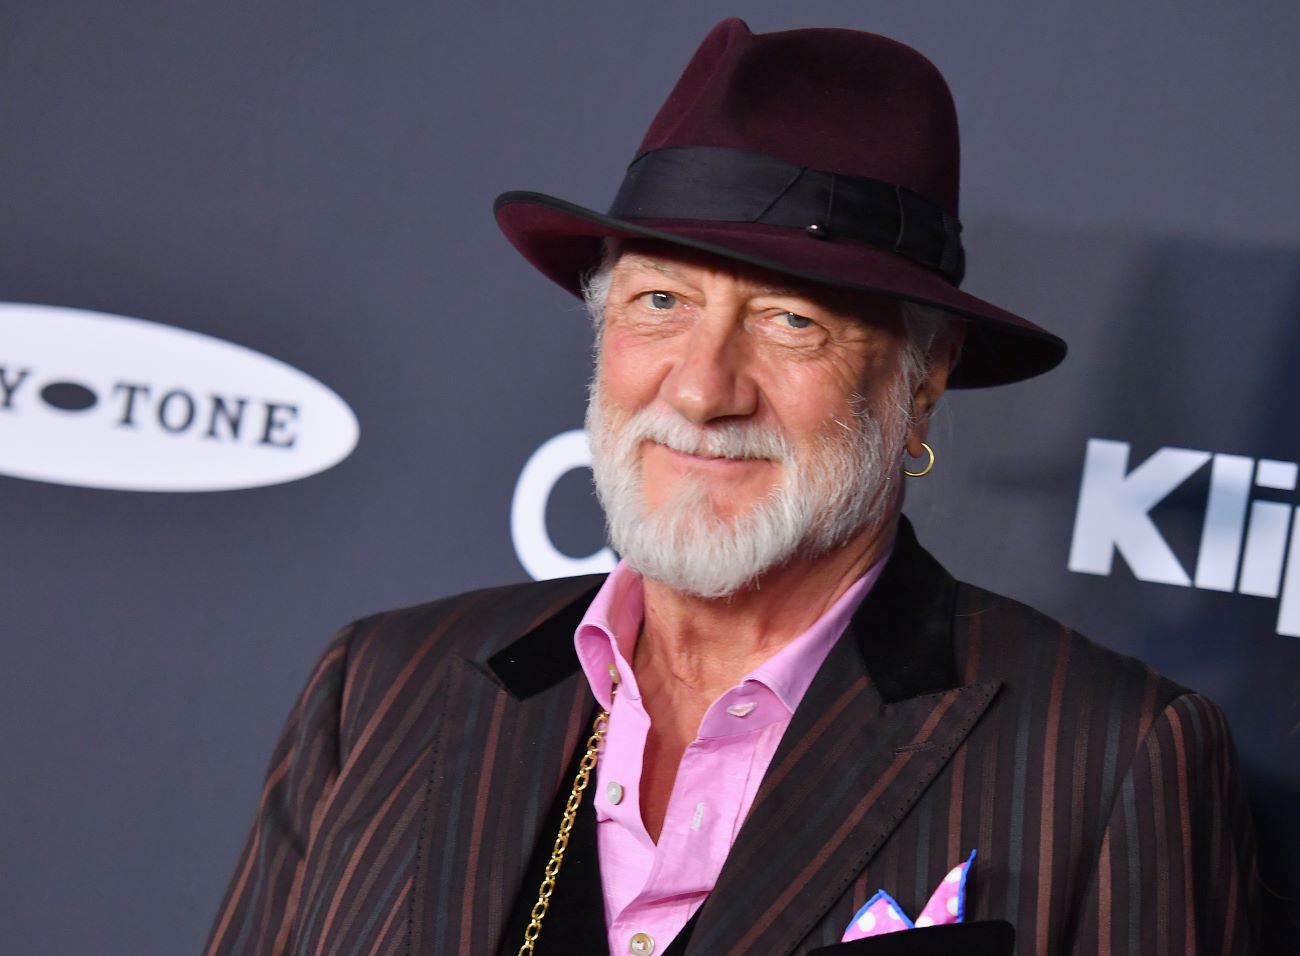 Mick Fleetwood wears a striped suit, gold jewelry, and a hat. Harry Styles made him the face of his beauty brand.